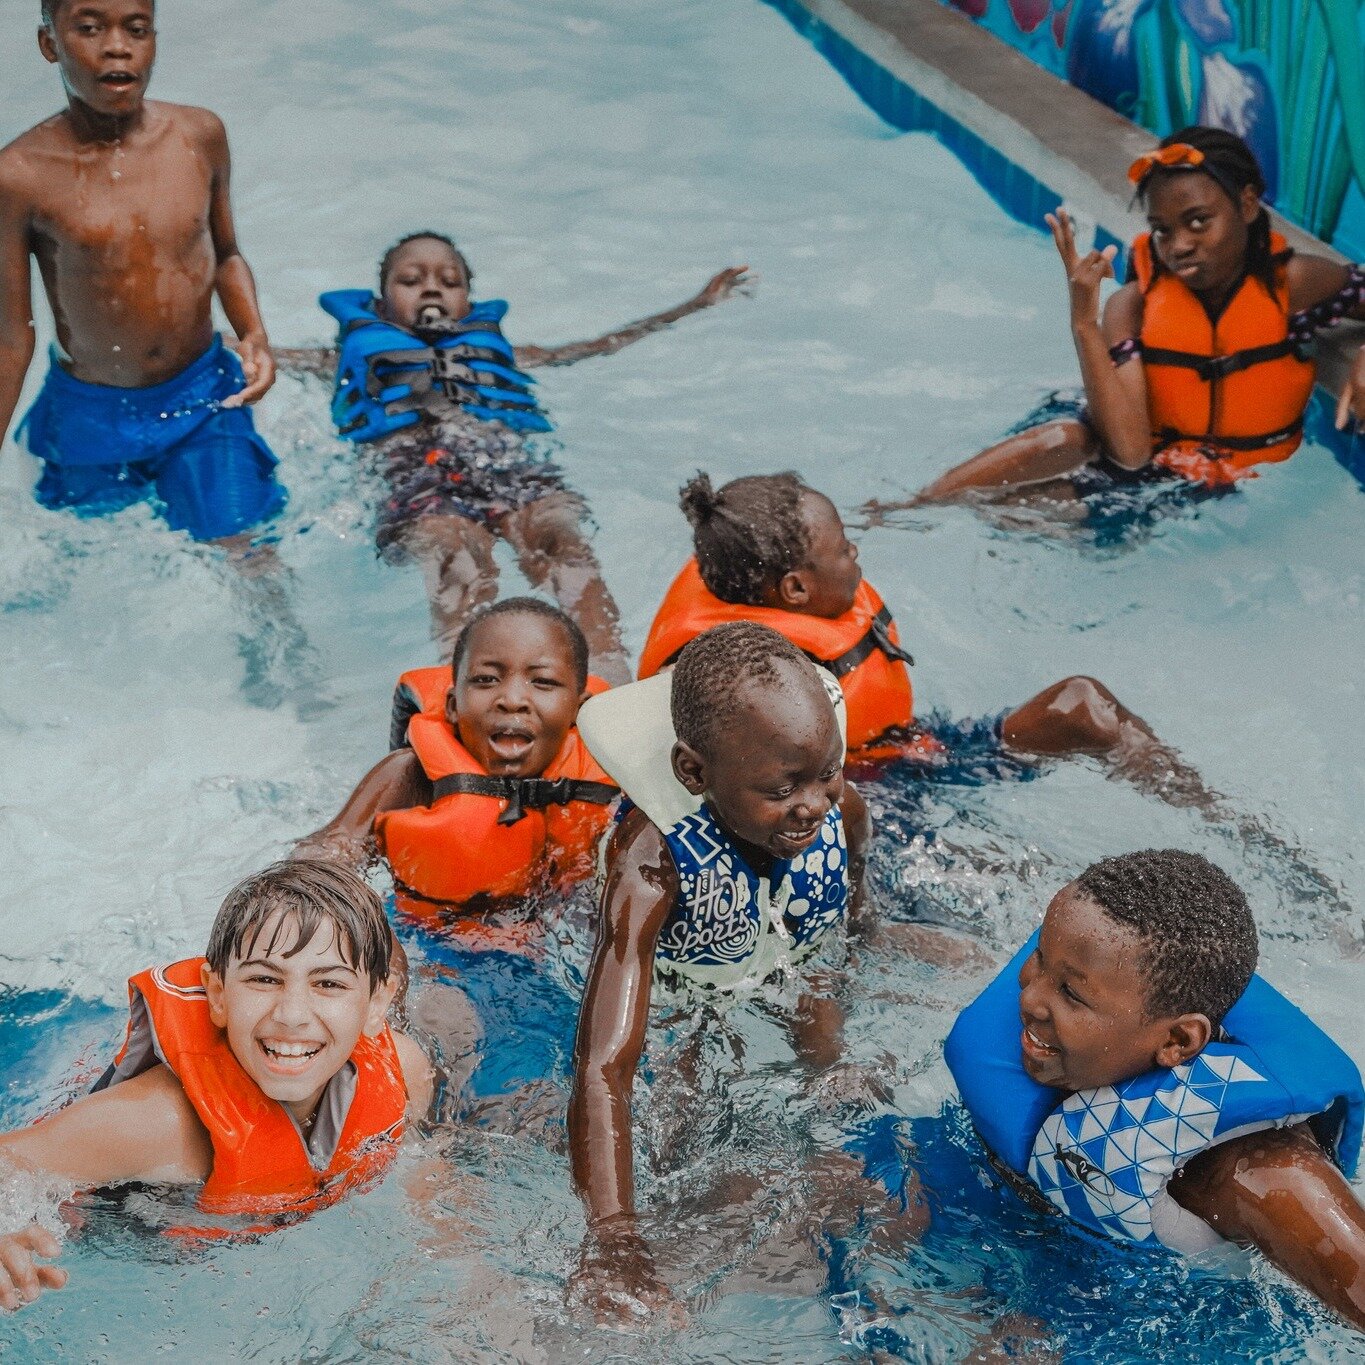 Thank you, Spokane Regional Health District, for donating life jackets! Last week, more kids enjoyed swimming in the pool with the new life jackets. Here are some pictures of their refreshing moments! 

We are still accepting life jacket donations. I